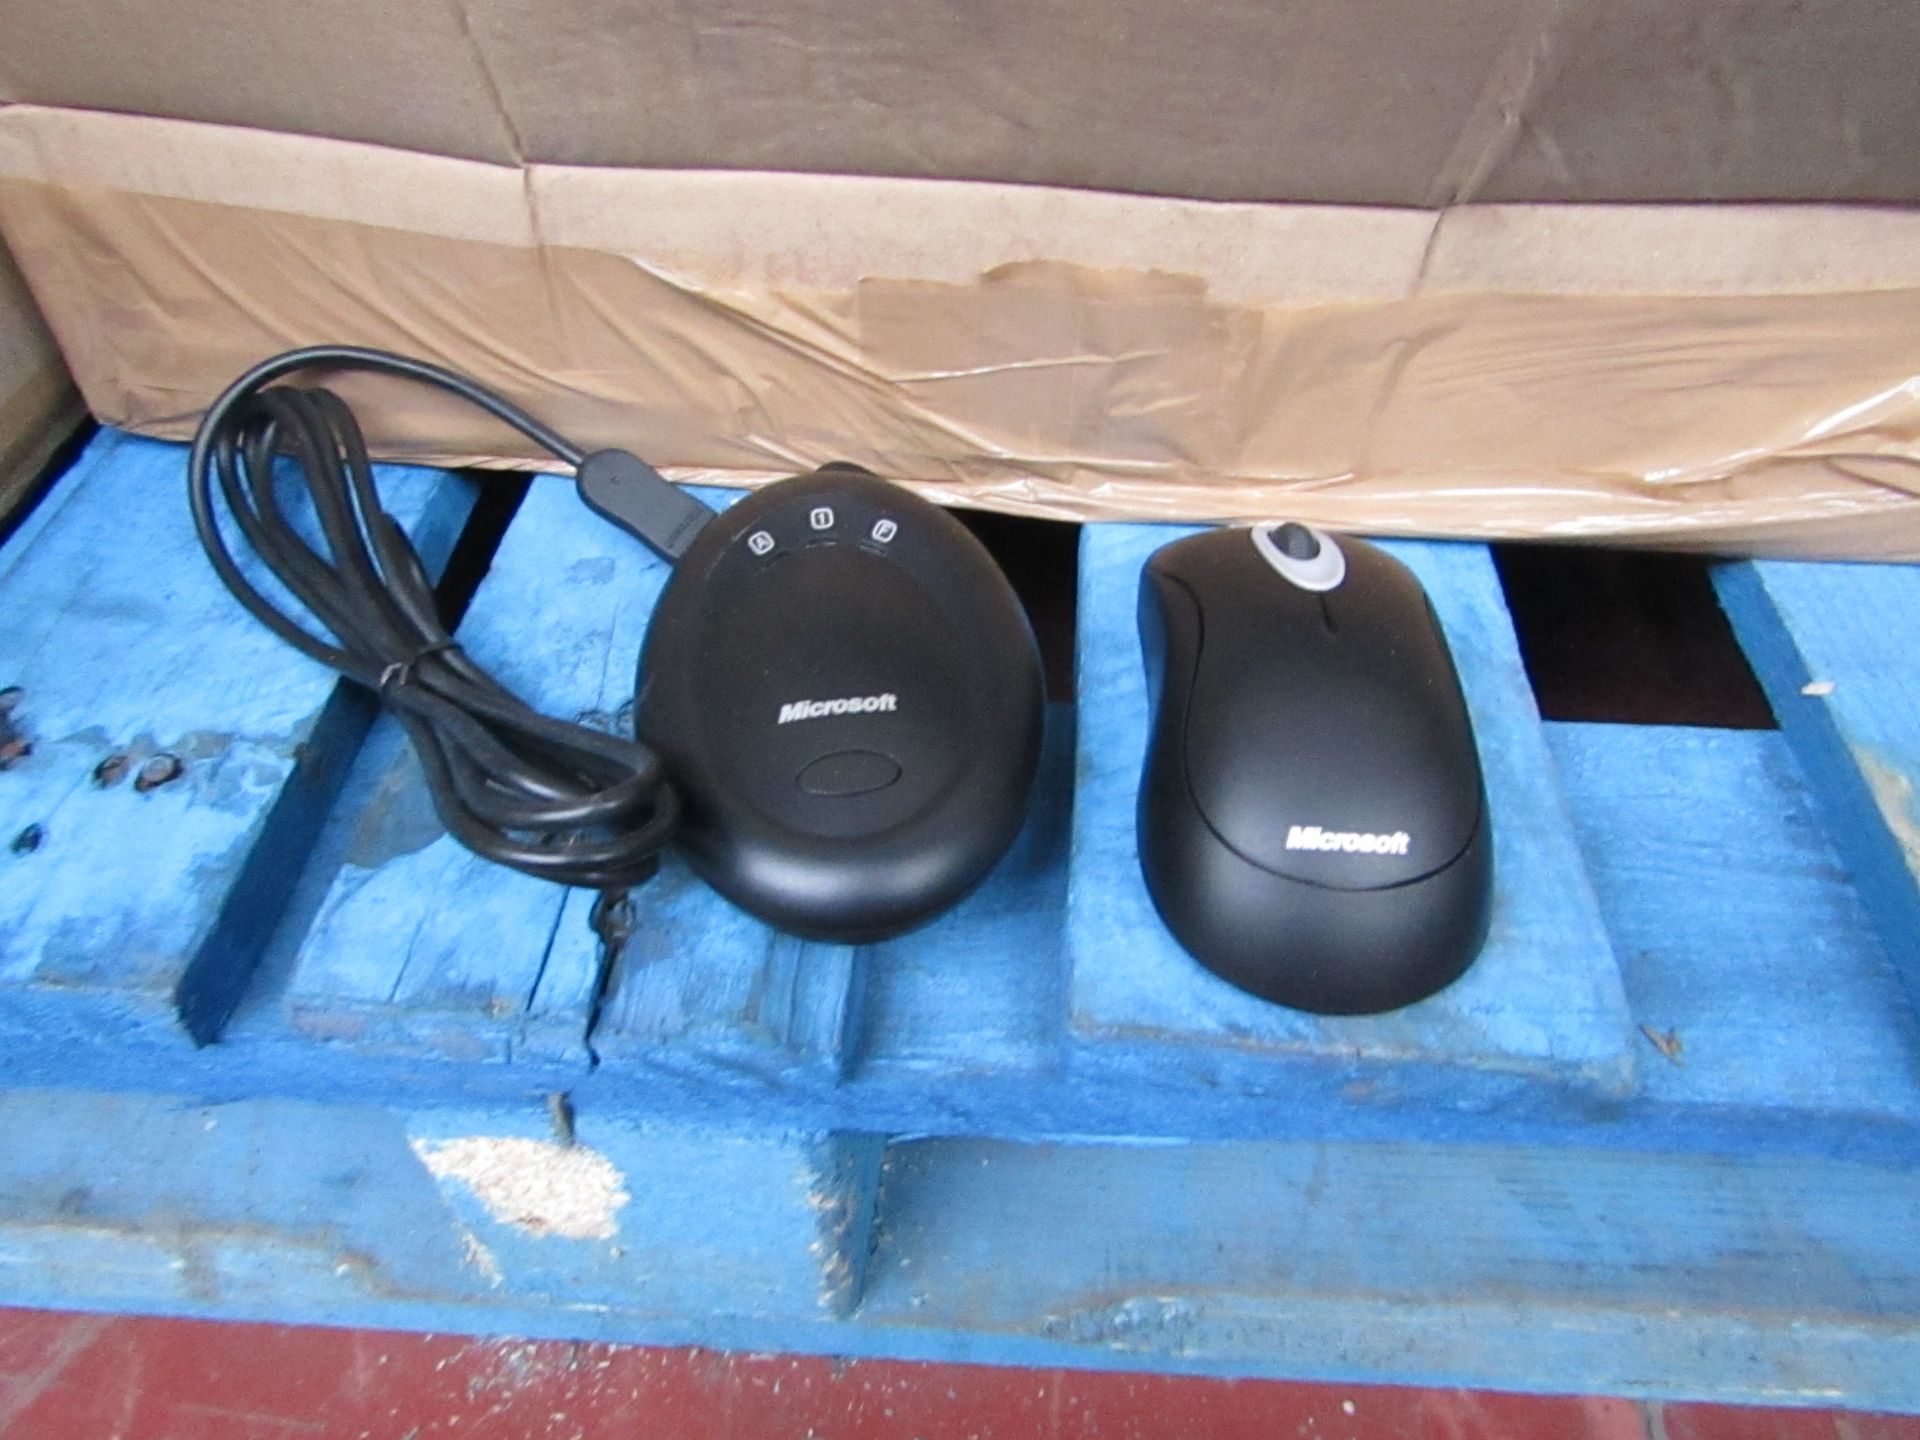 2X Microsoft - Wireless Optical Mouse 2000, packaged.